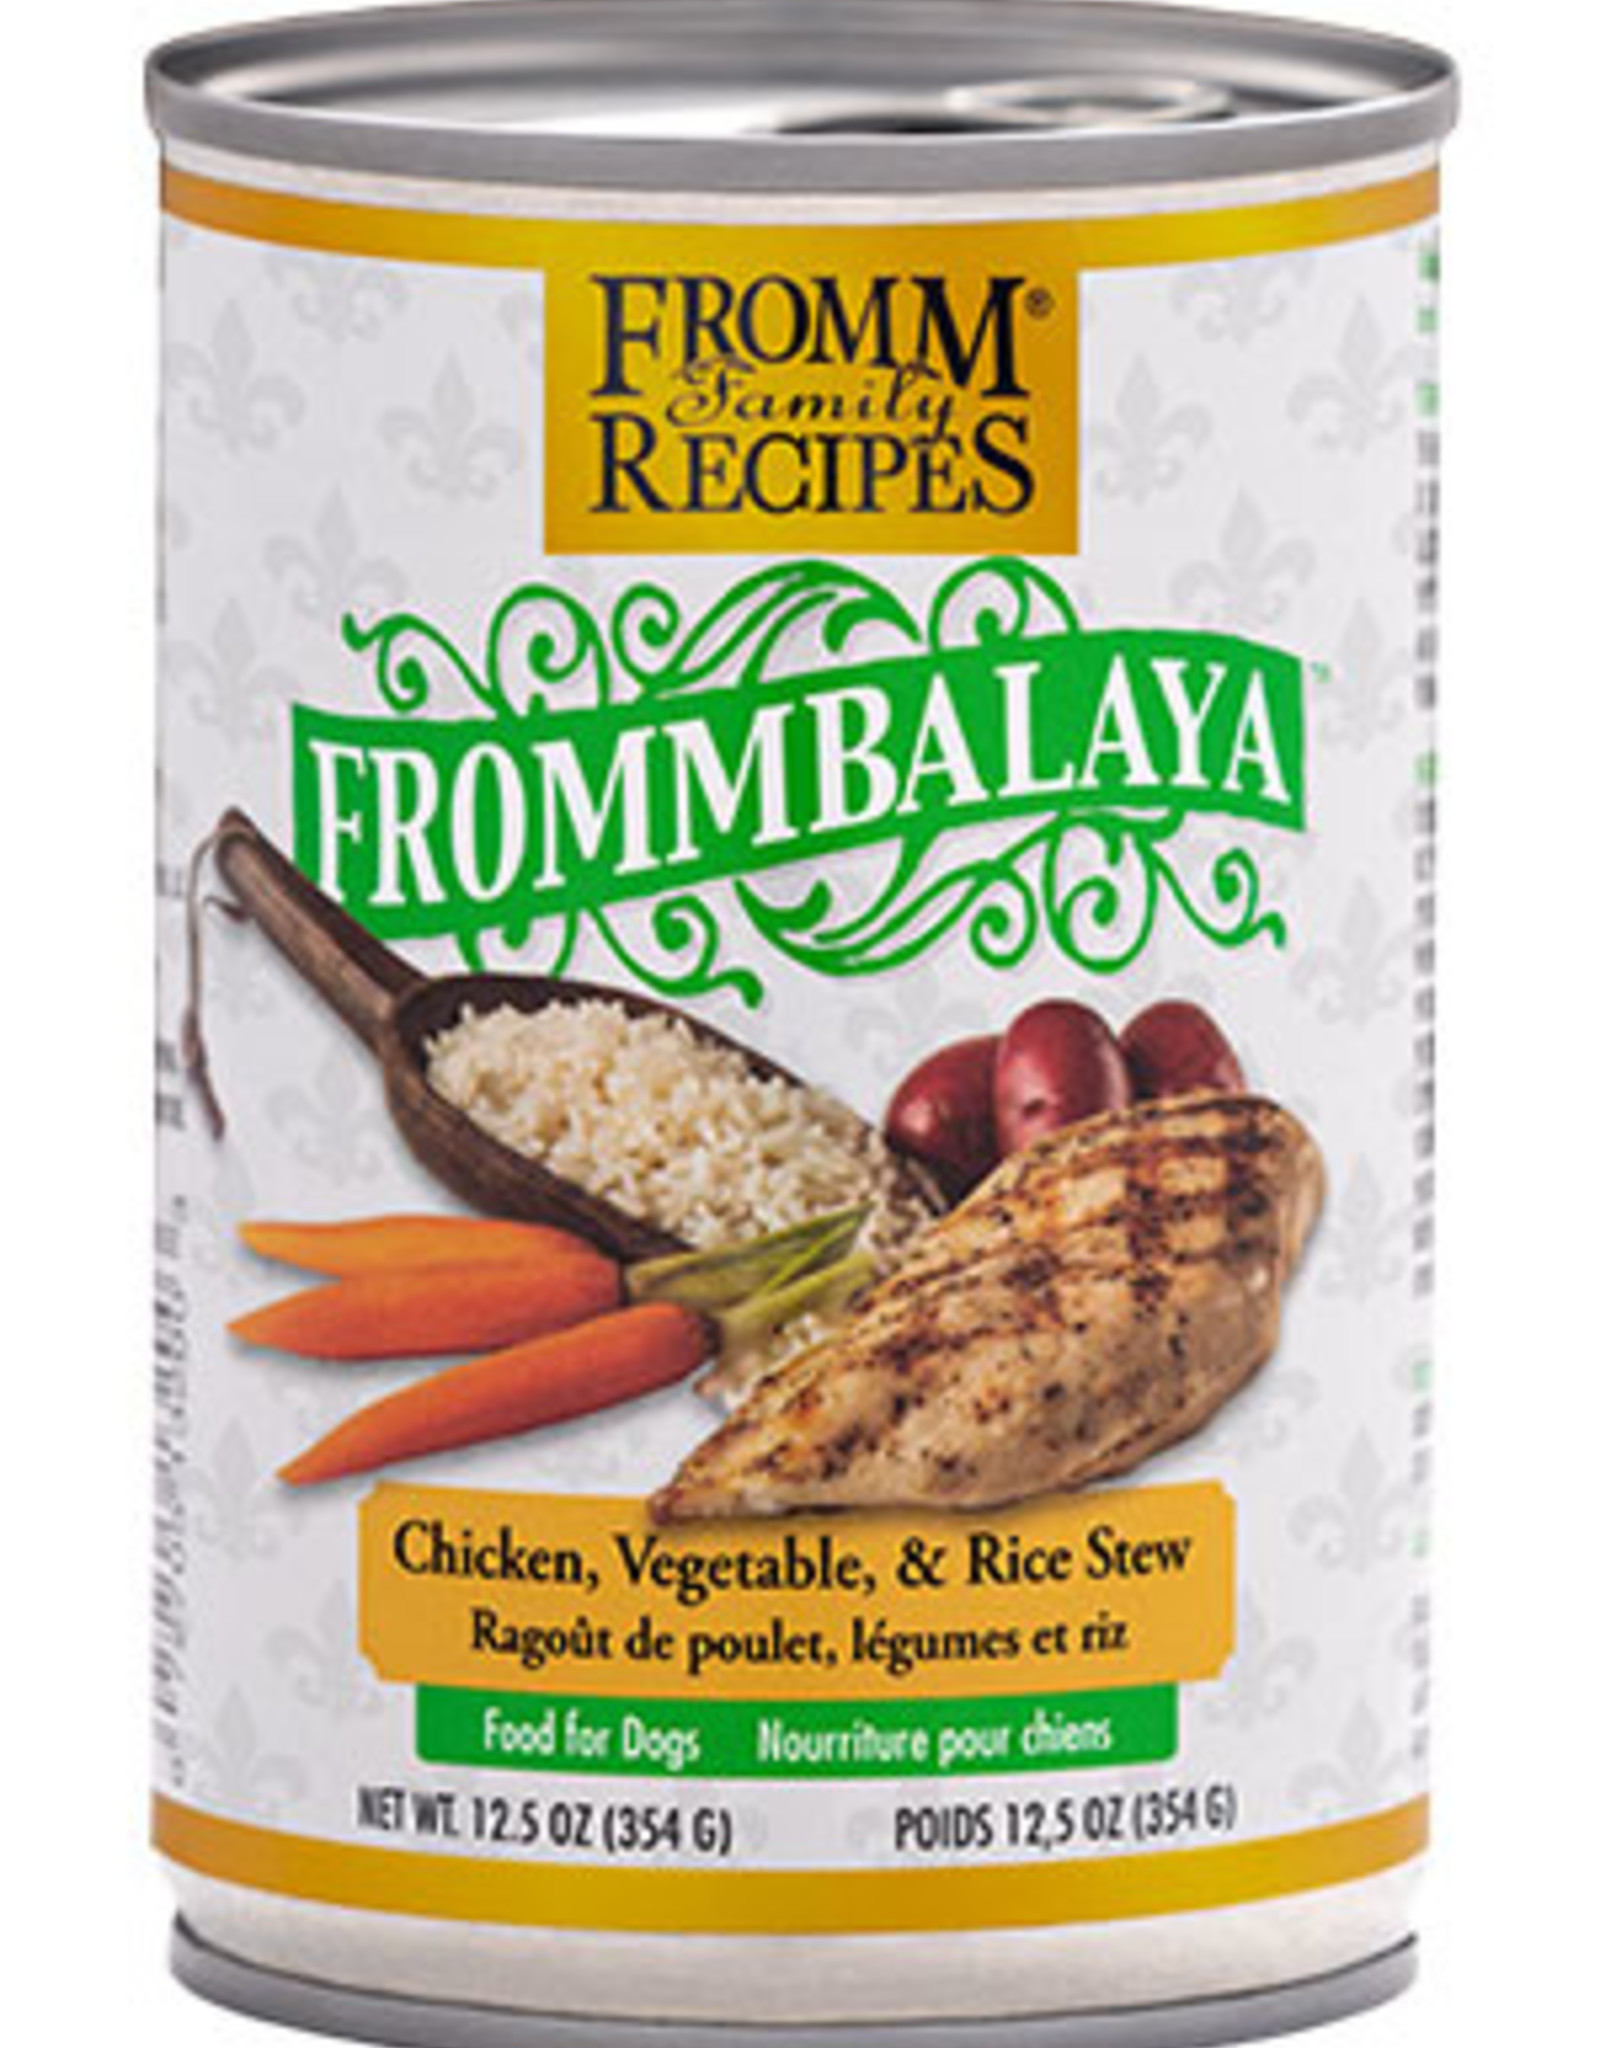 FROMM FAMILY FOODS LLC FROMM DOG FROMMBALAYA CHICKEN & RICE STEW CAN 12.5OZ CASE OF 12